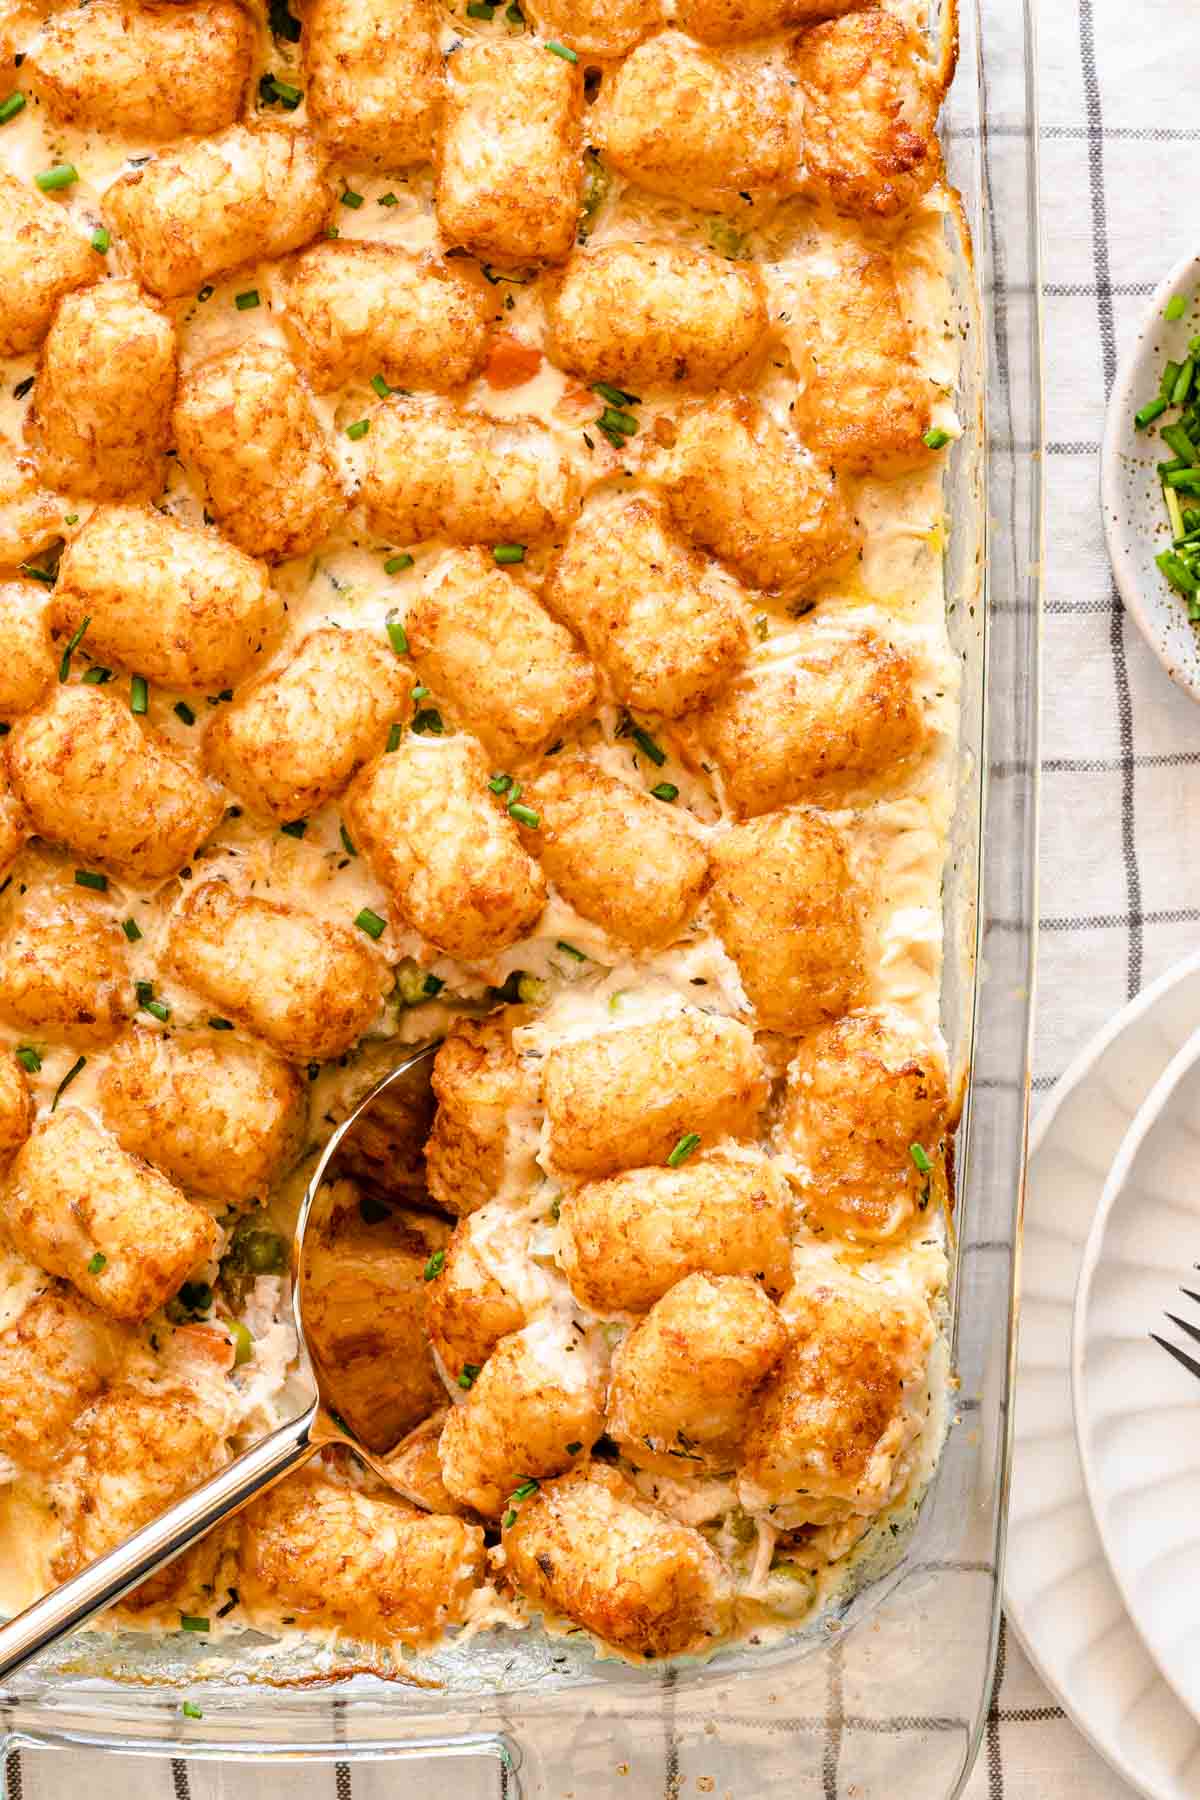 spoon scooping out serving of tater tot casserole